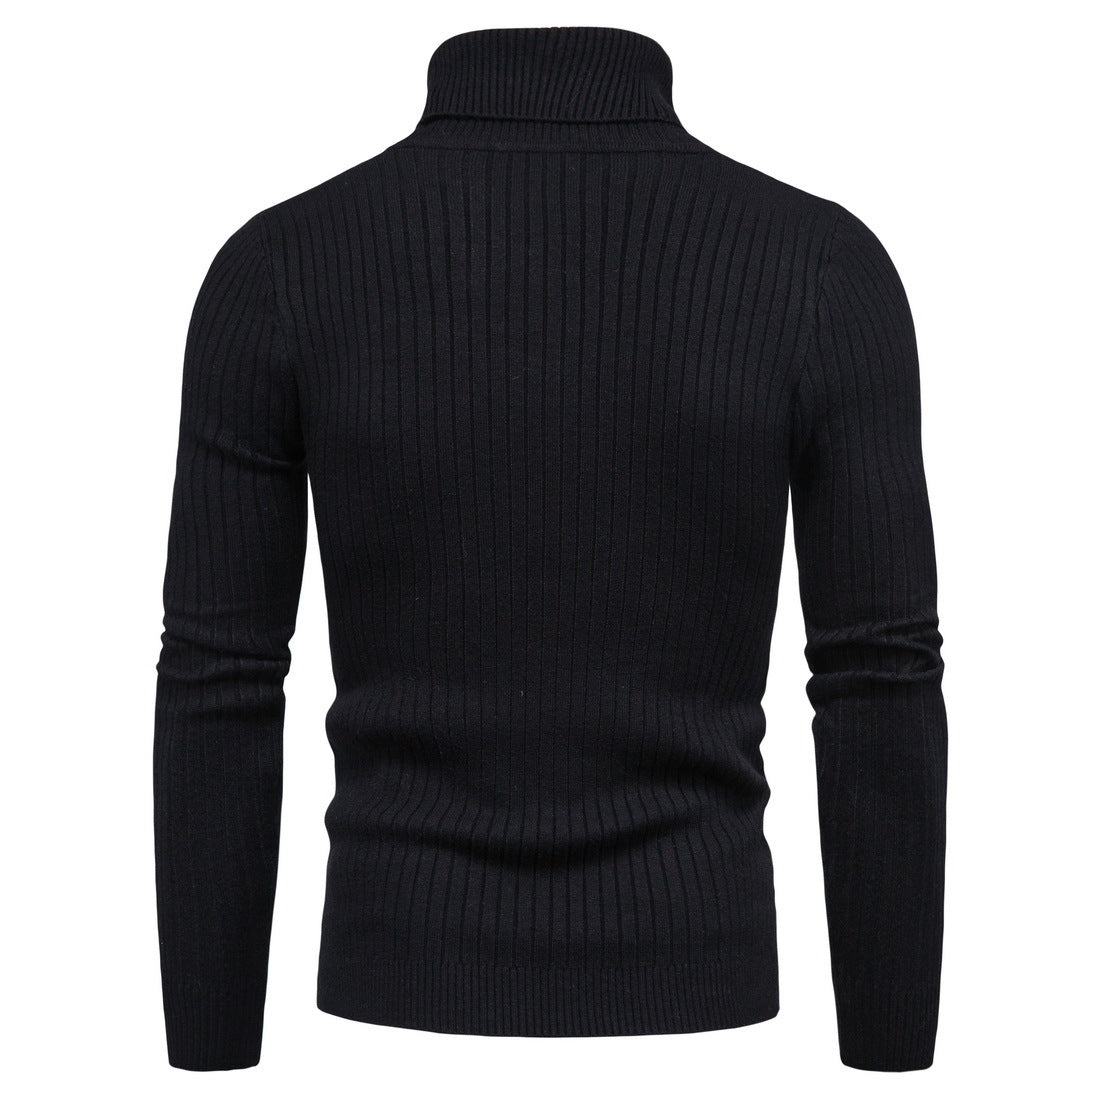 Turtleneck Cable-Knit Sweater - Shop With Ameera